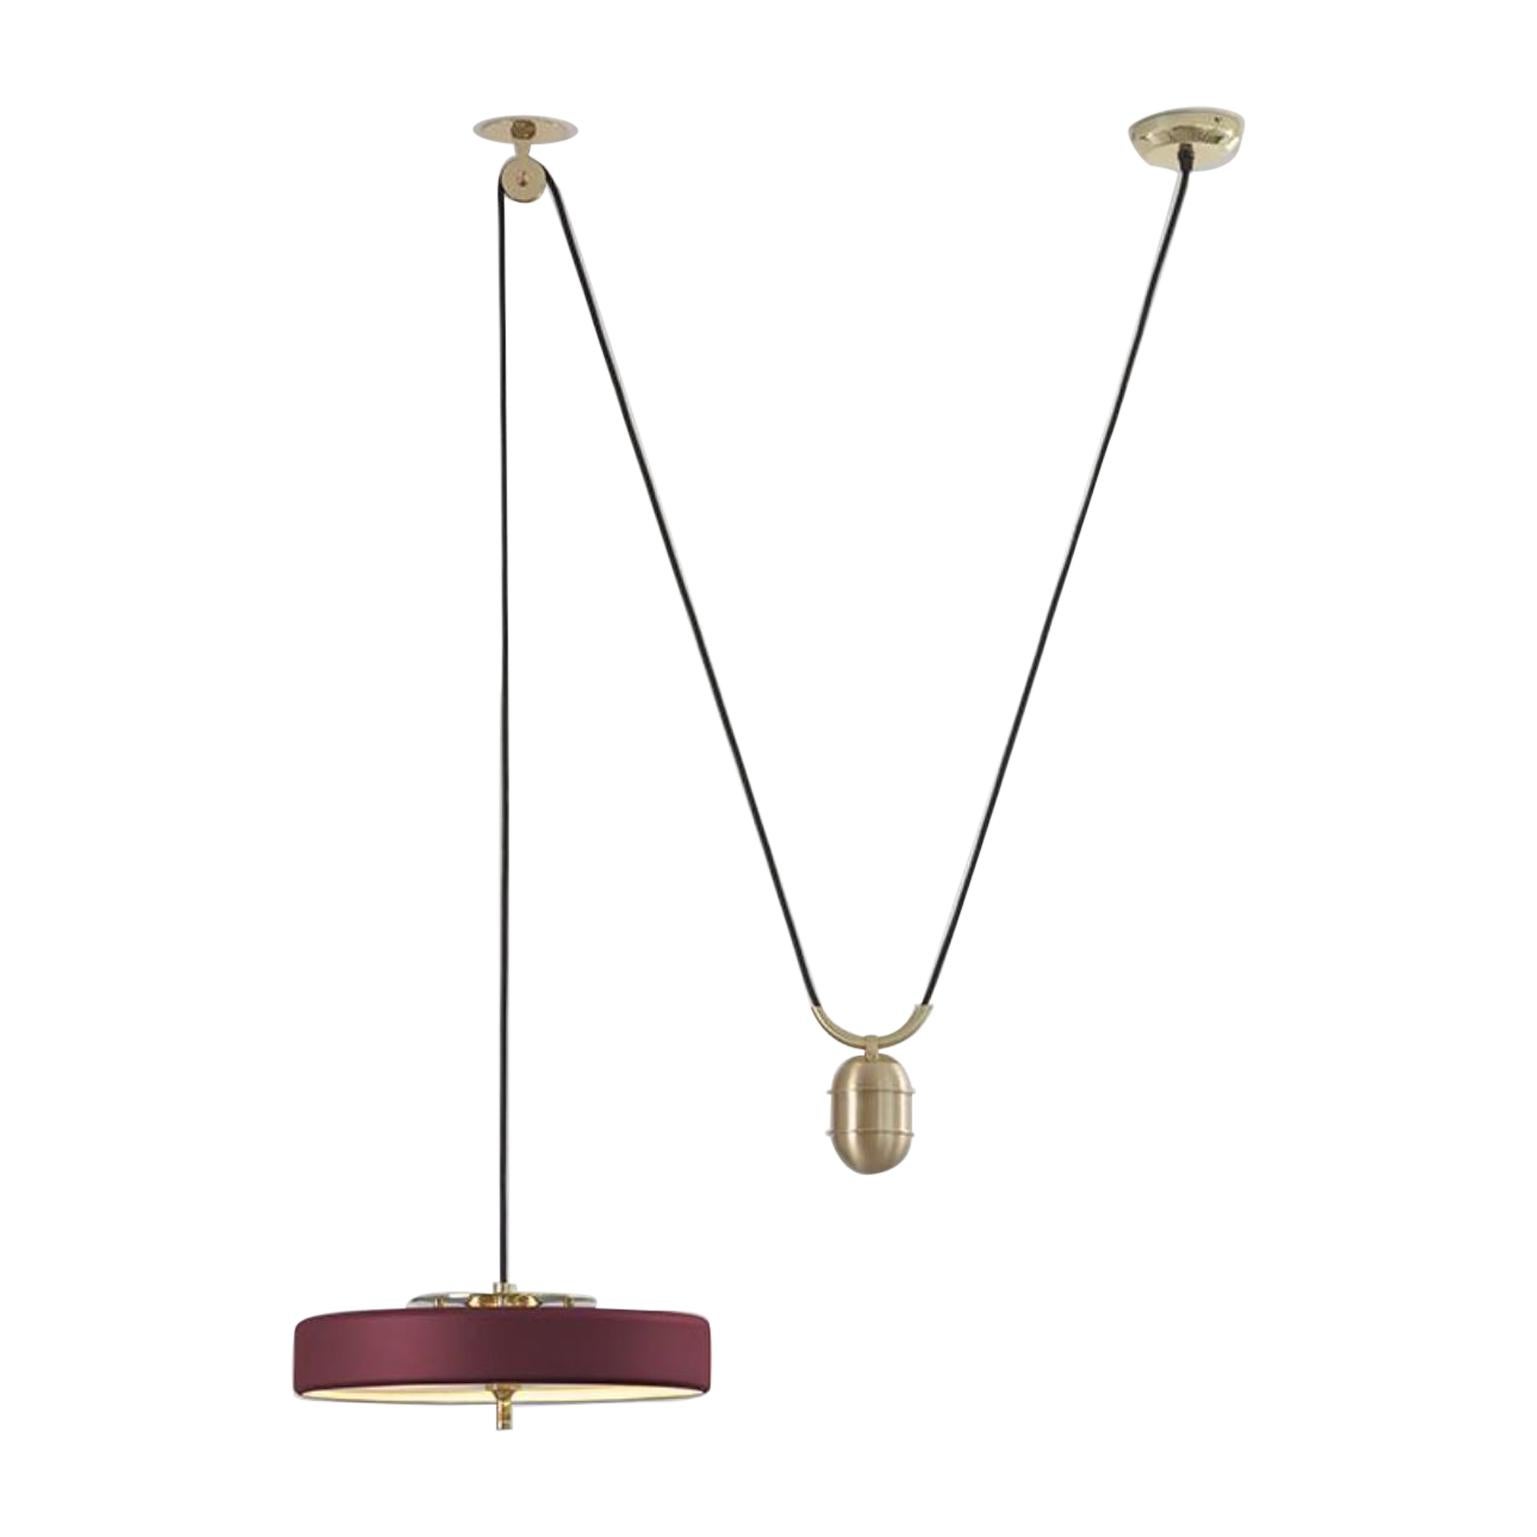 Revolve Rise and Fall Pendant Light, Polished Brass, Oxblood by Bert Frank